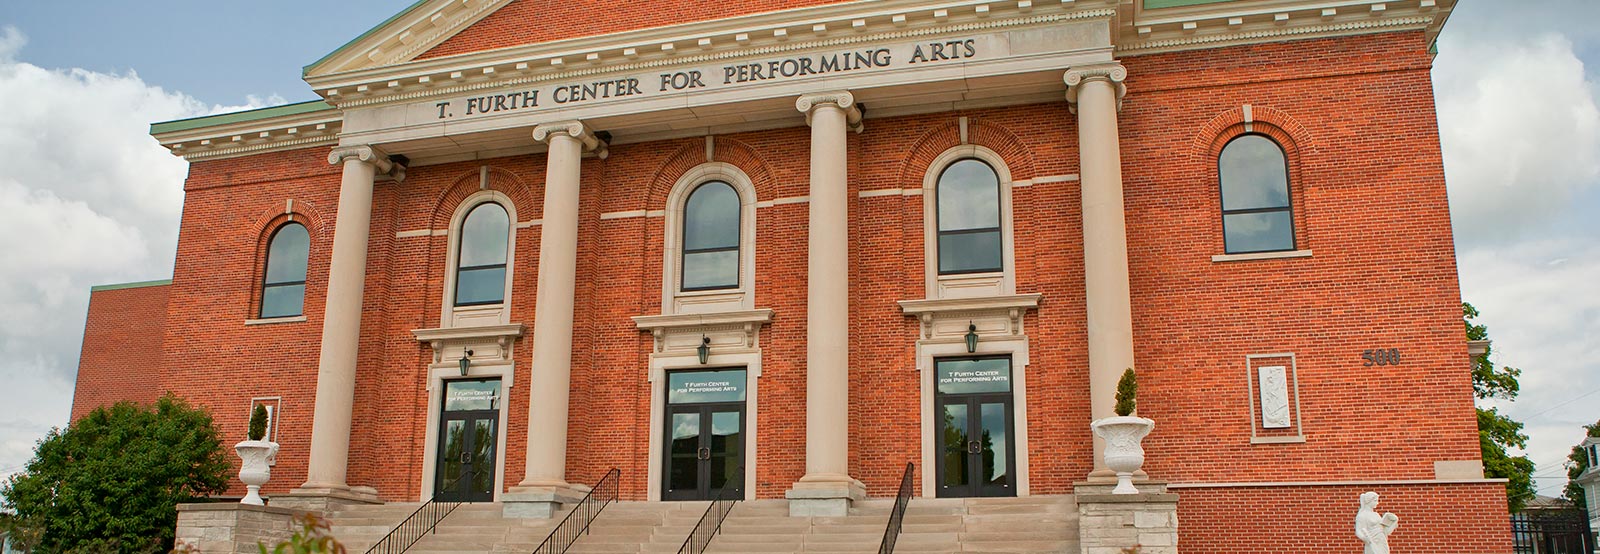 T. Furth Center for Performing Arts and Ryan Concert Hall